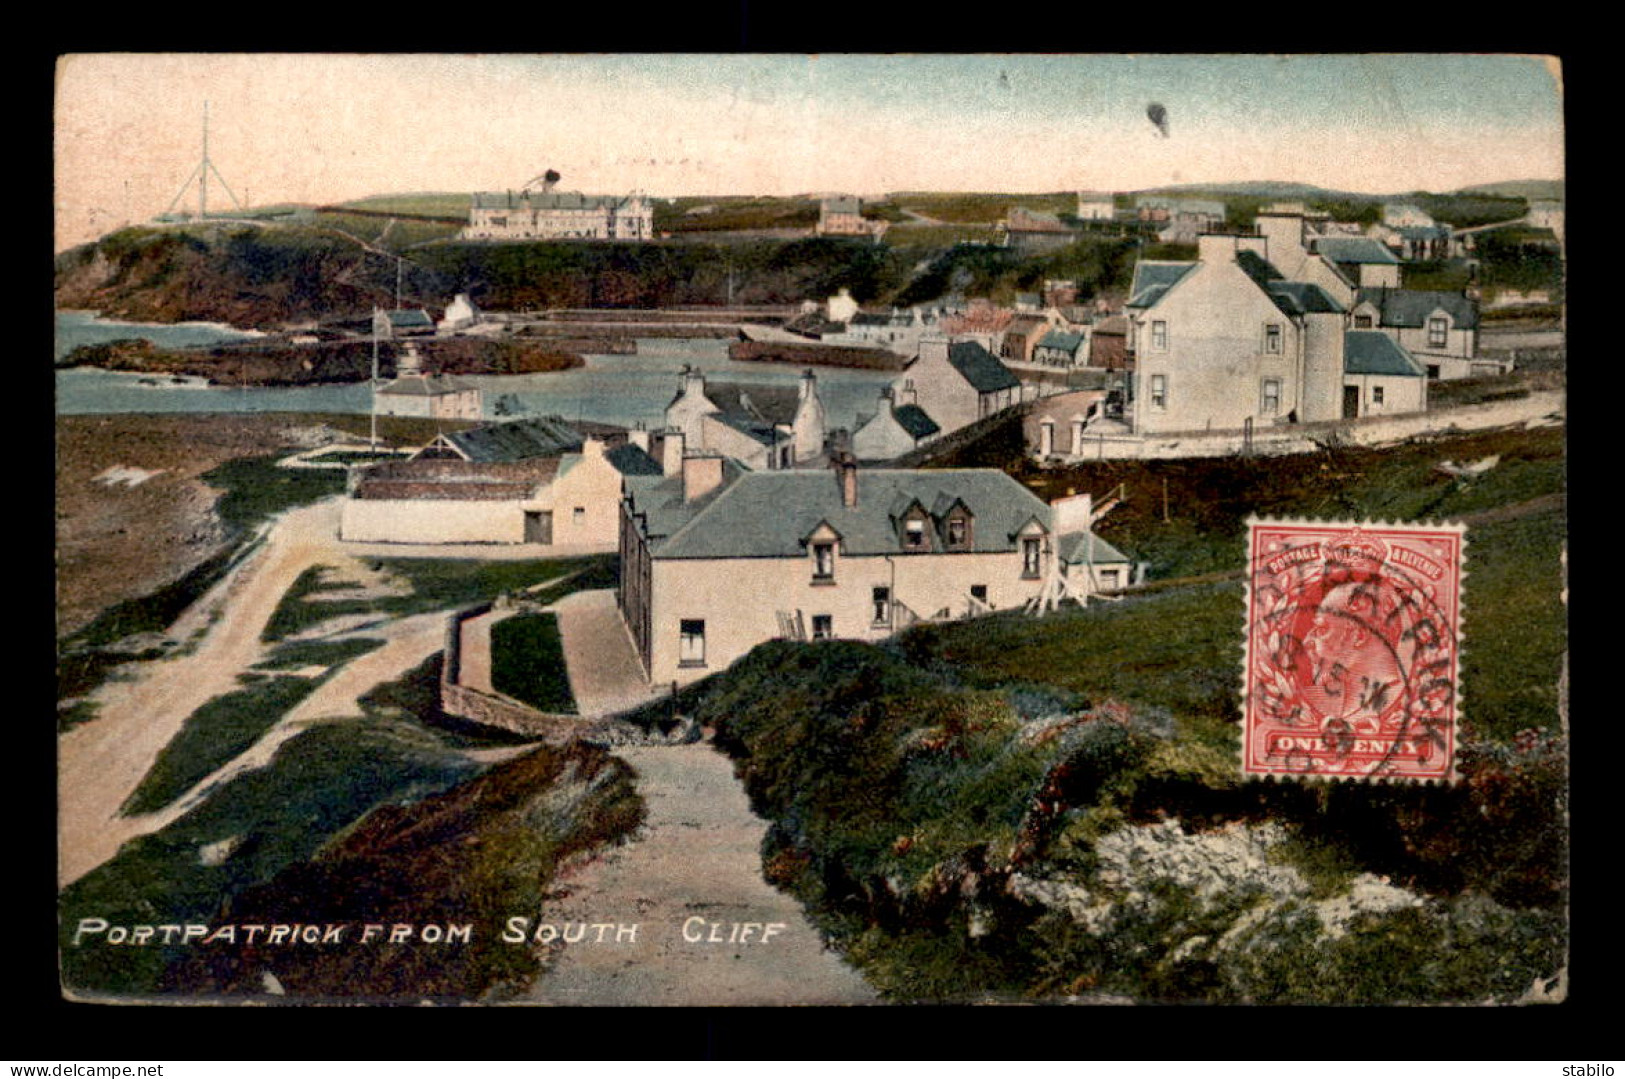 ROYAUME-UNI - ECOSSE - PORTPATRICK FROM SOUTH CLIFF - Wigtownshire